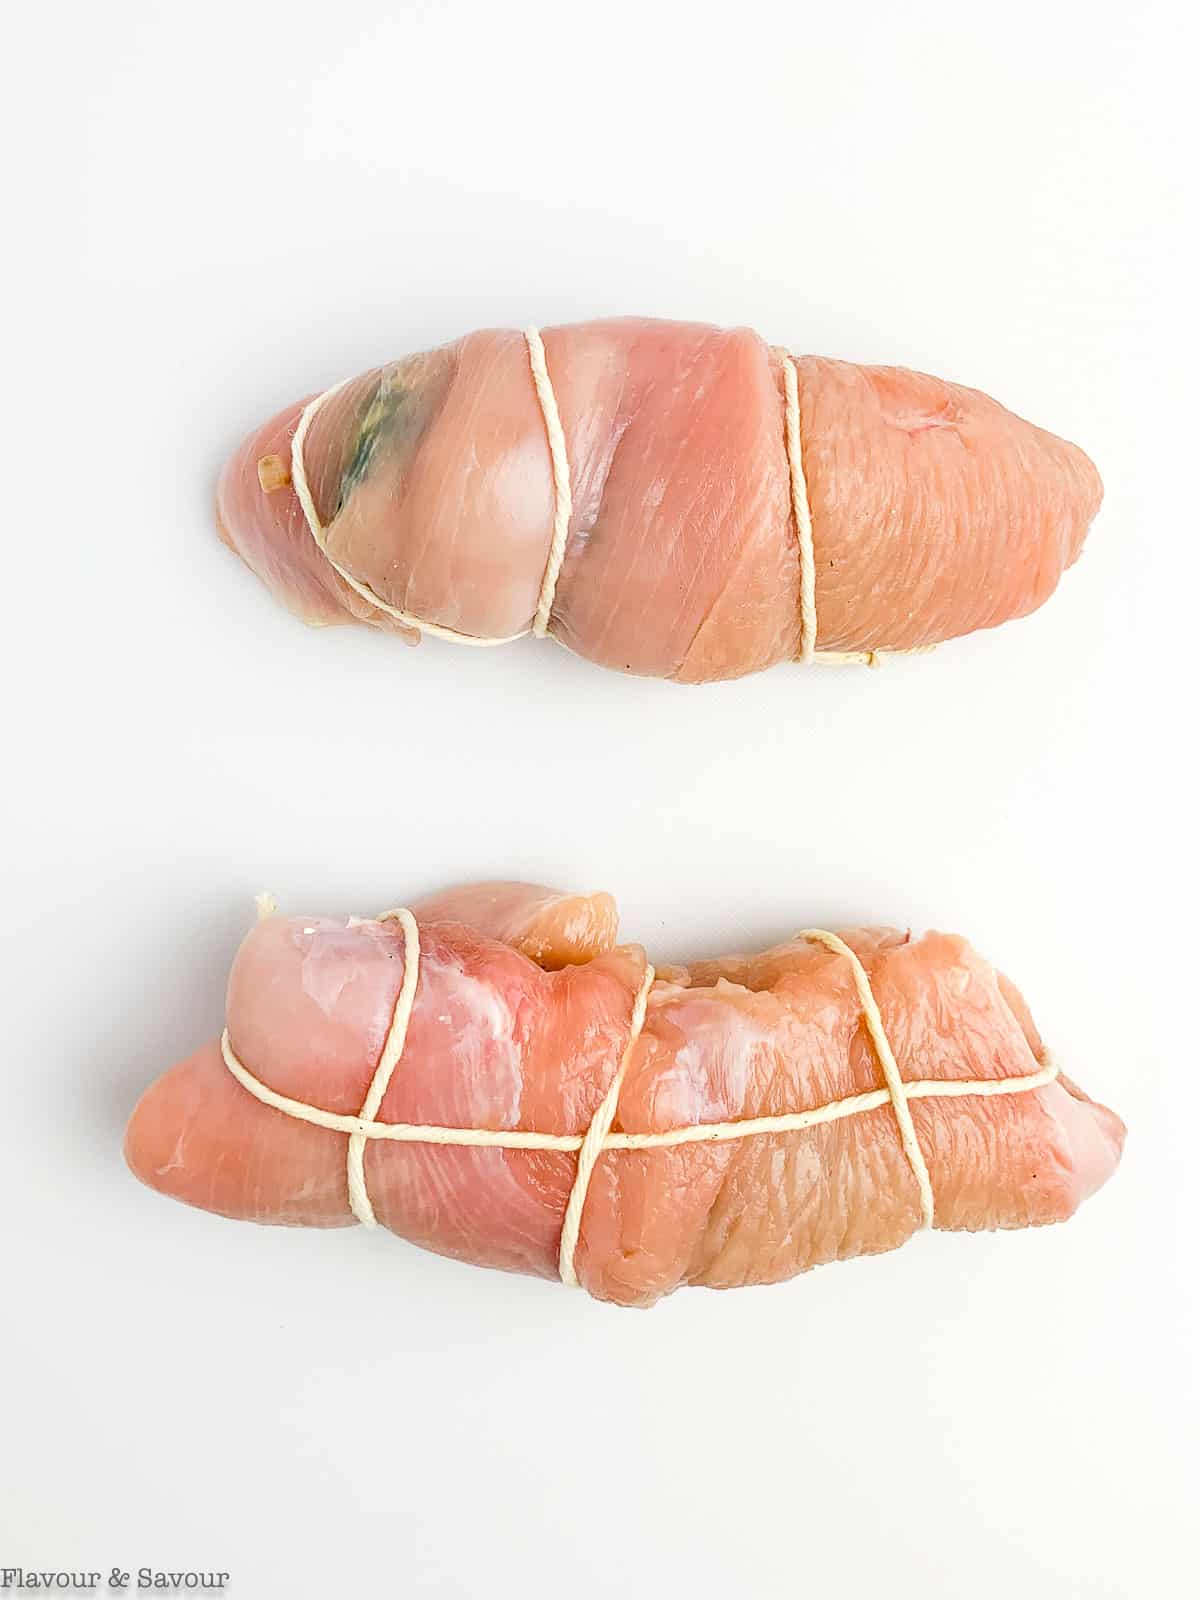 Rolled and tied stuffed rolled turkey breasts.